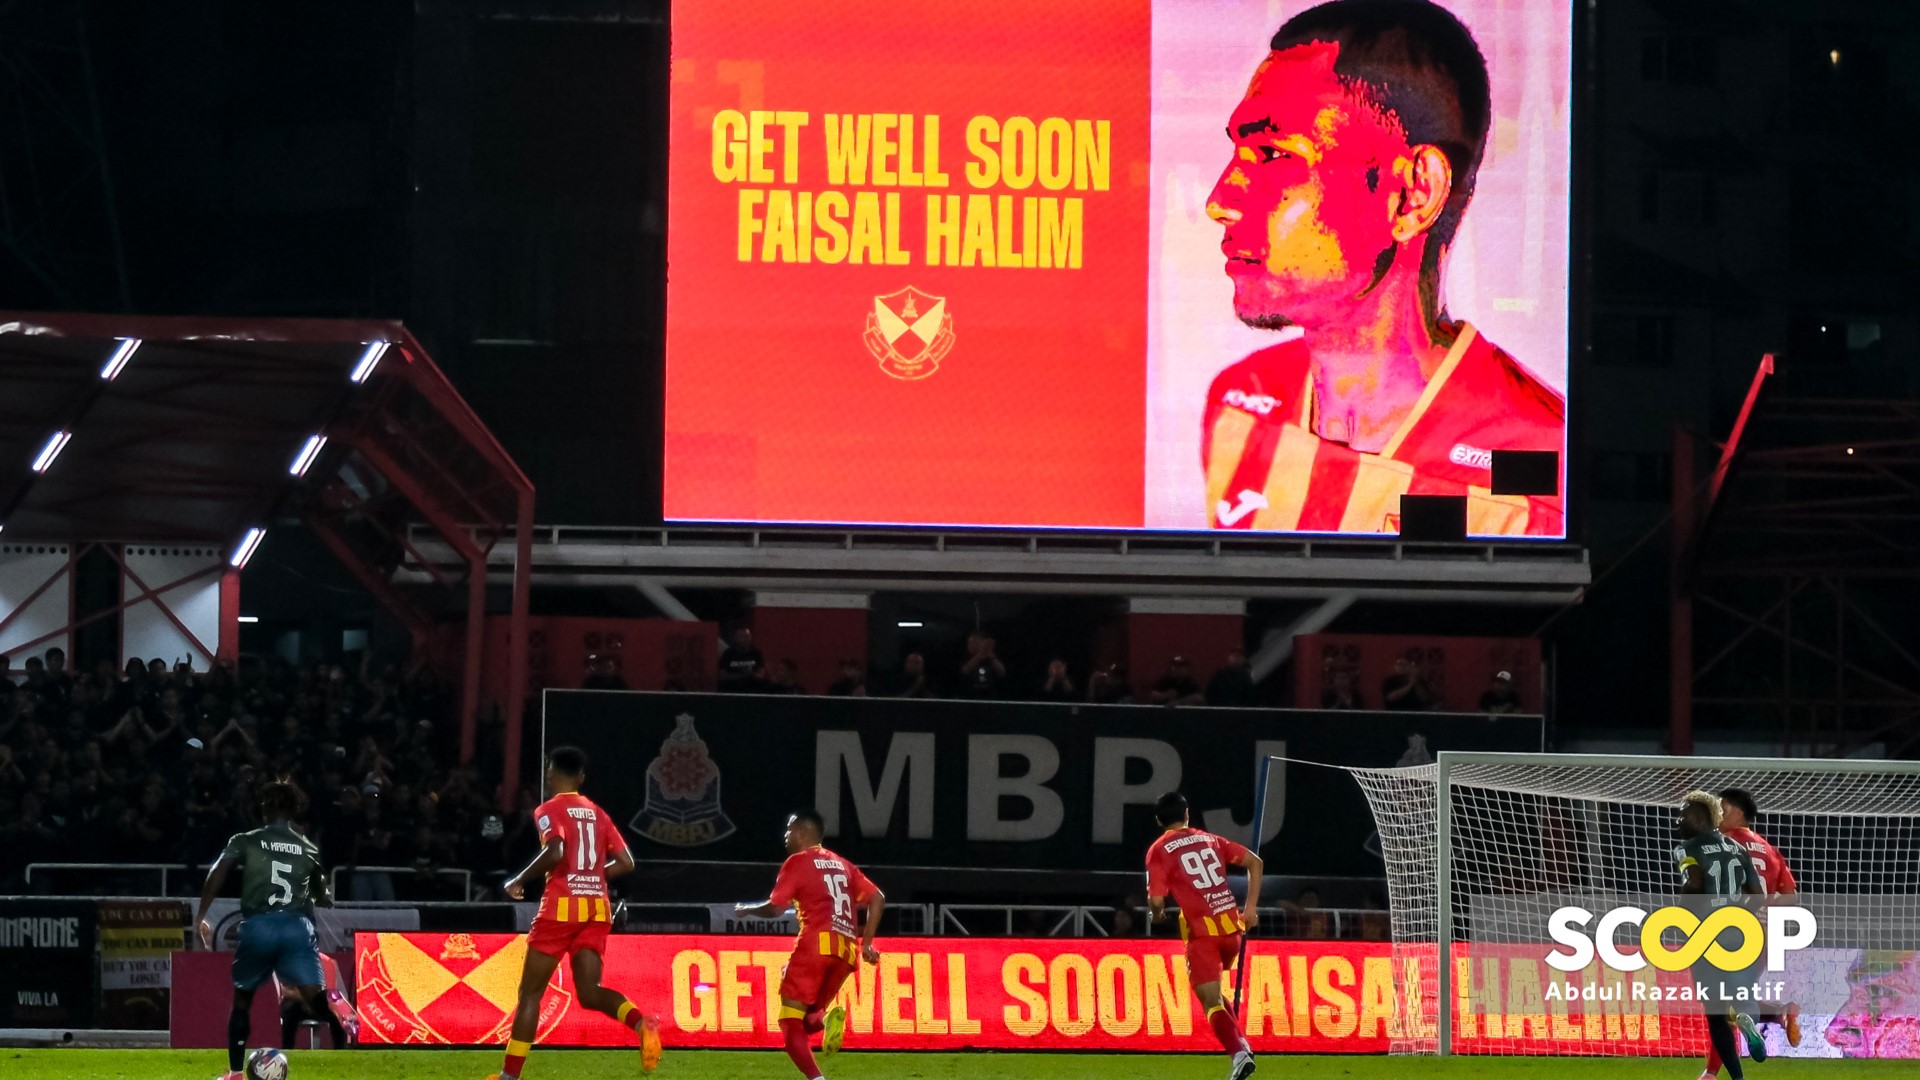 Will Faisal Halim heal in time to play for Selangor FC this season?